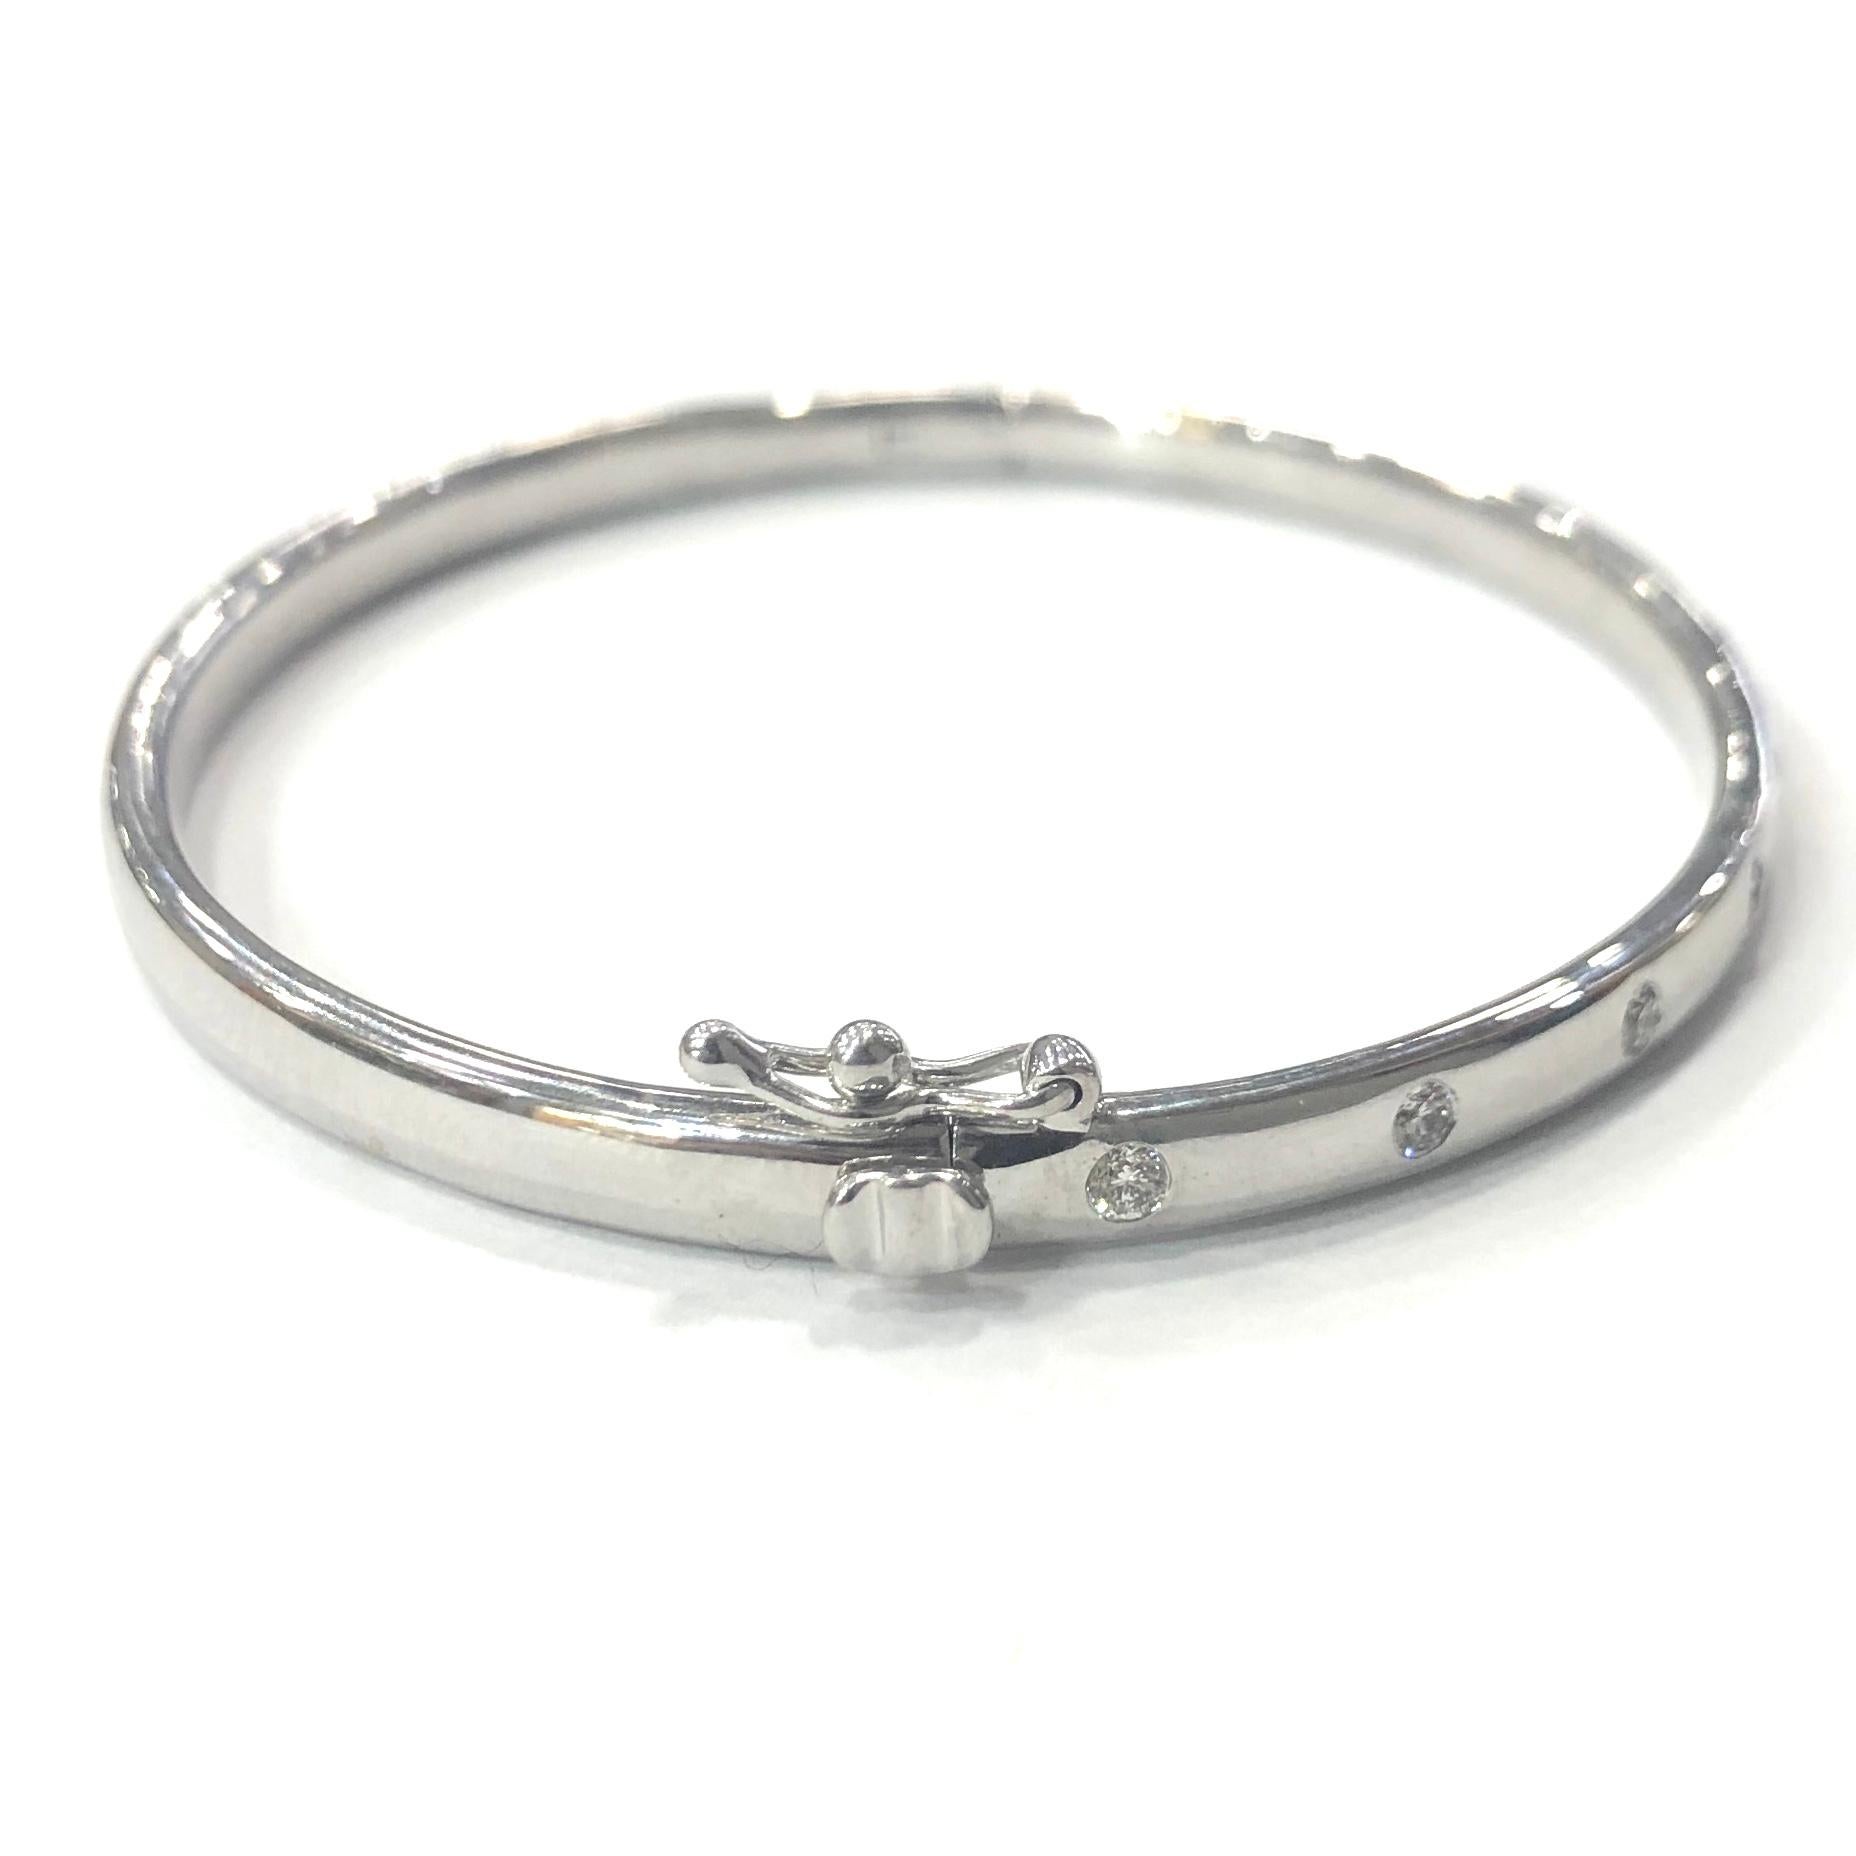 9ct White Gold Solid Hinged Diamond Bangle. Set with 10 Round brilliant cut diamonds.
With a push release clasp and safety catch

Approximate total Diamond weight : 0.50ct
Width : 4.5mm
Total Weight : 18.6g